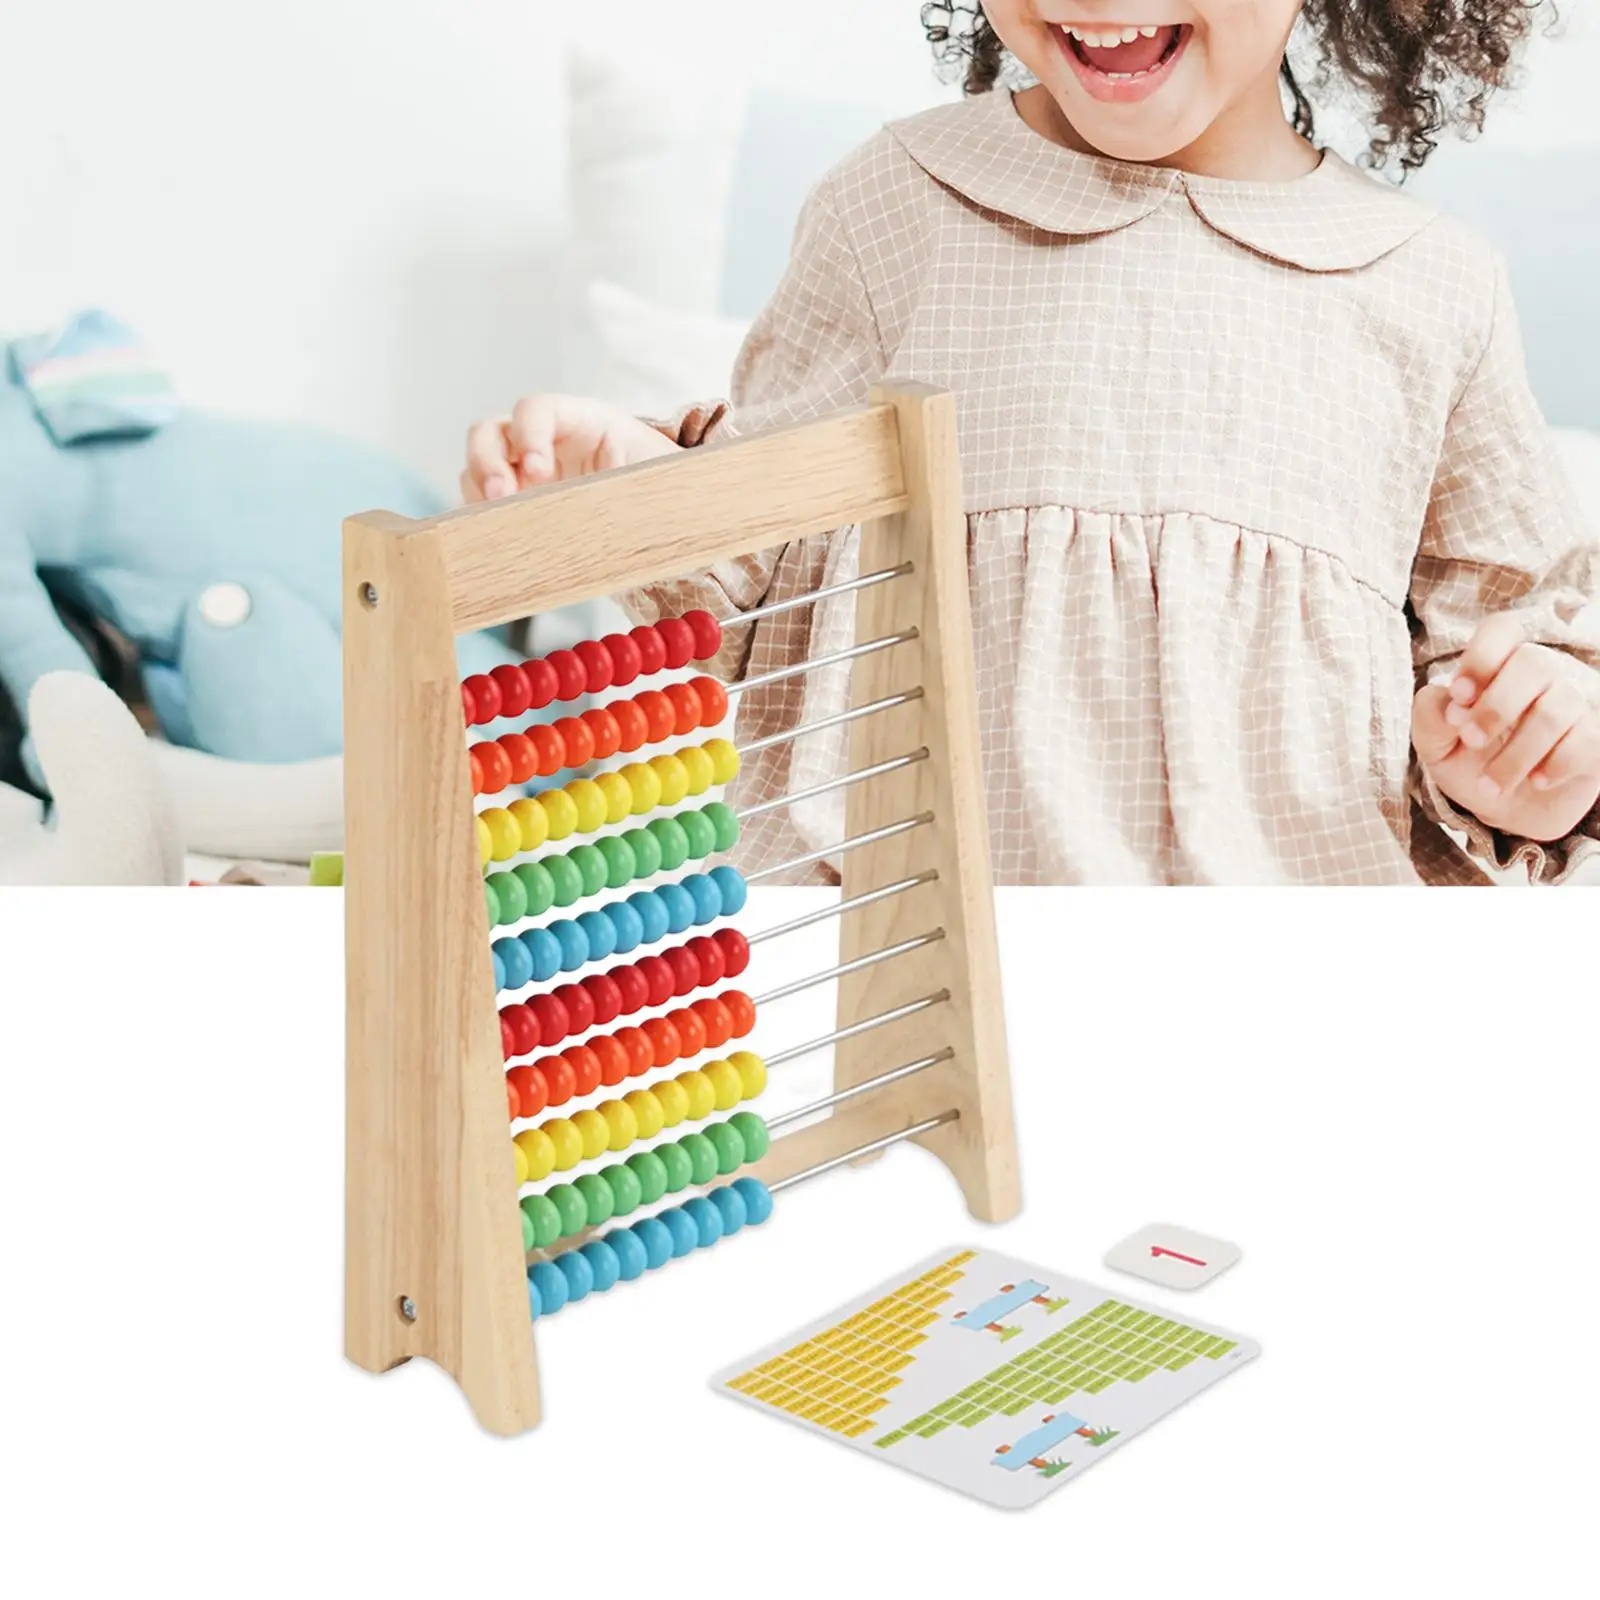 Classic Math Game Toy Mathematics Toy Development Learning Number Abacus for Kids Kindergarten Elementary Boys Girls Preschool